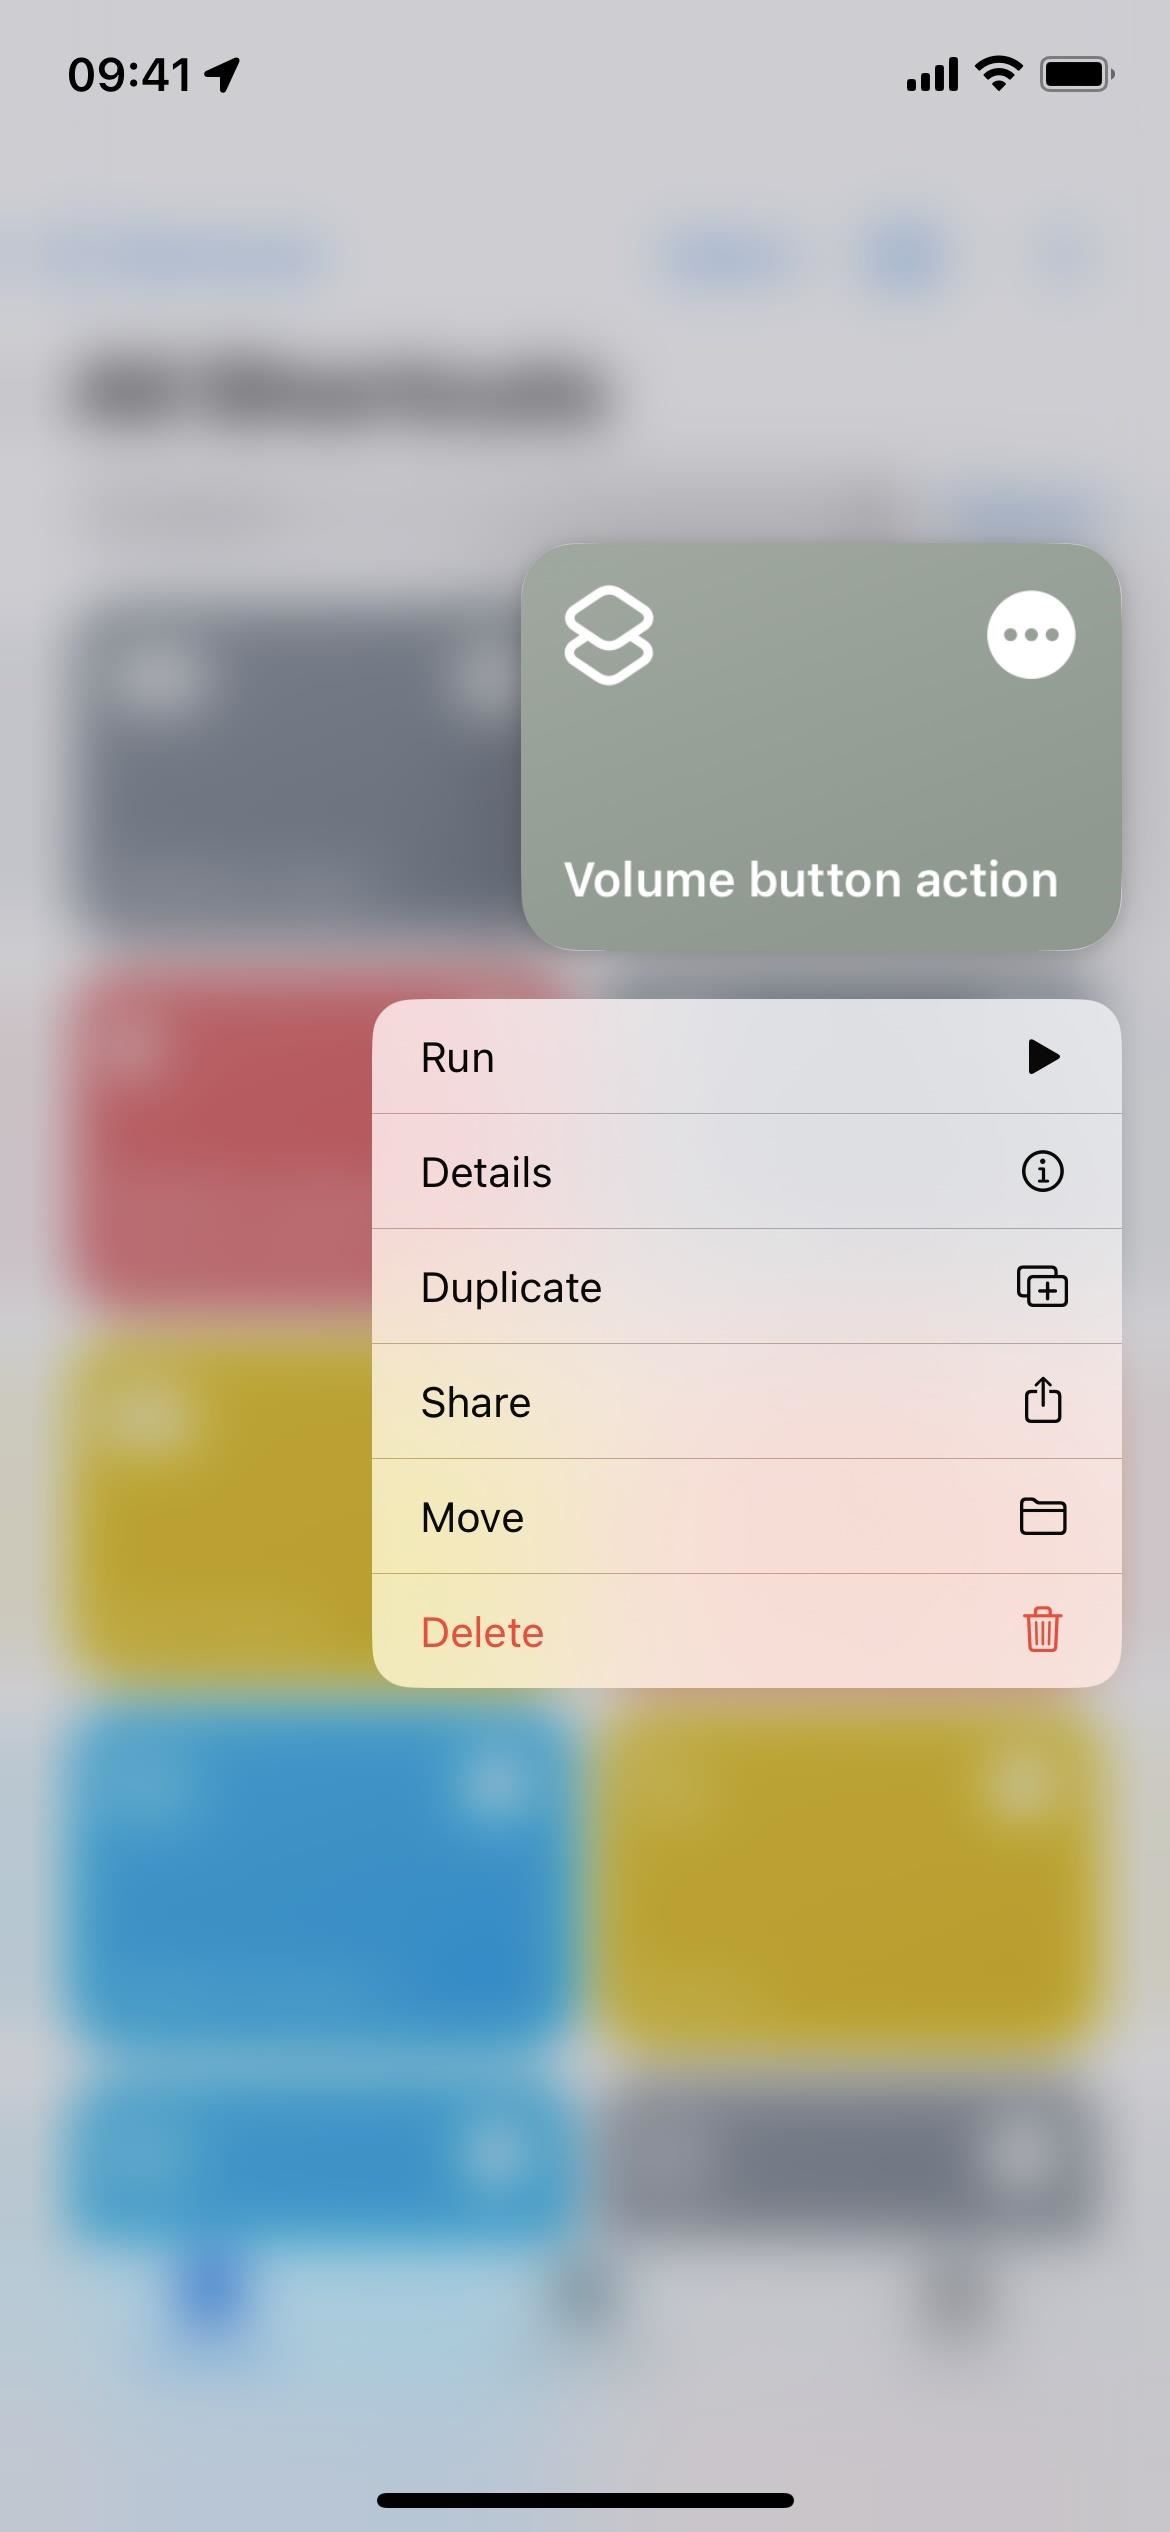 28 Must-Know Features in Apple's Shortcuts App for iOS 16 and iPadOS 16